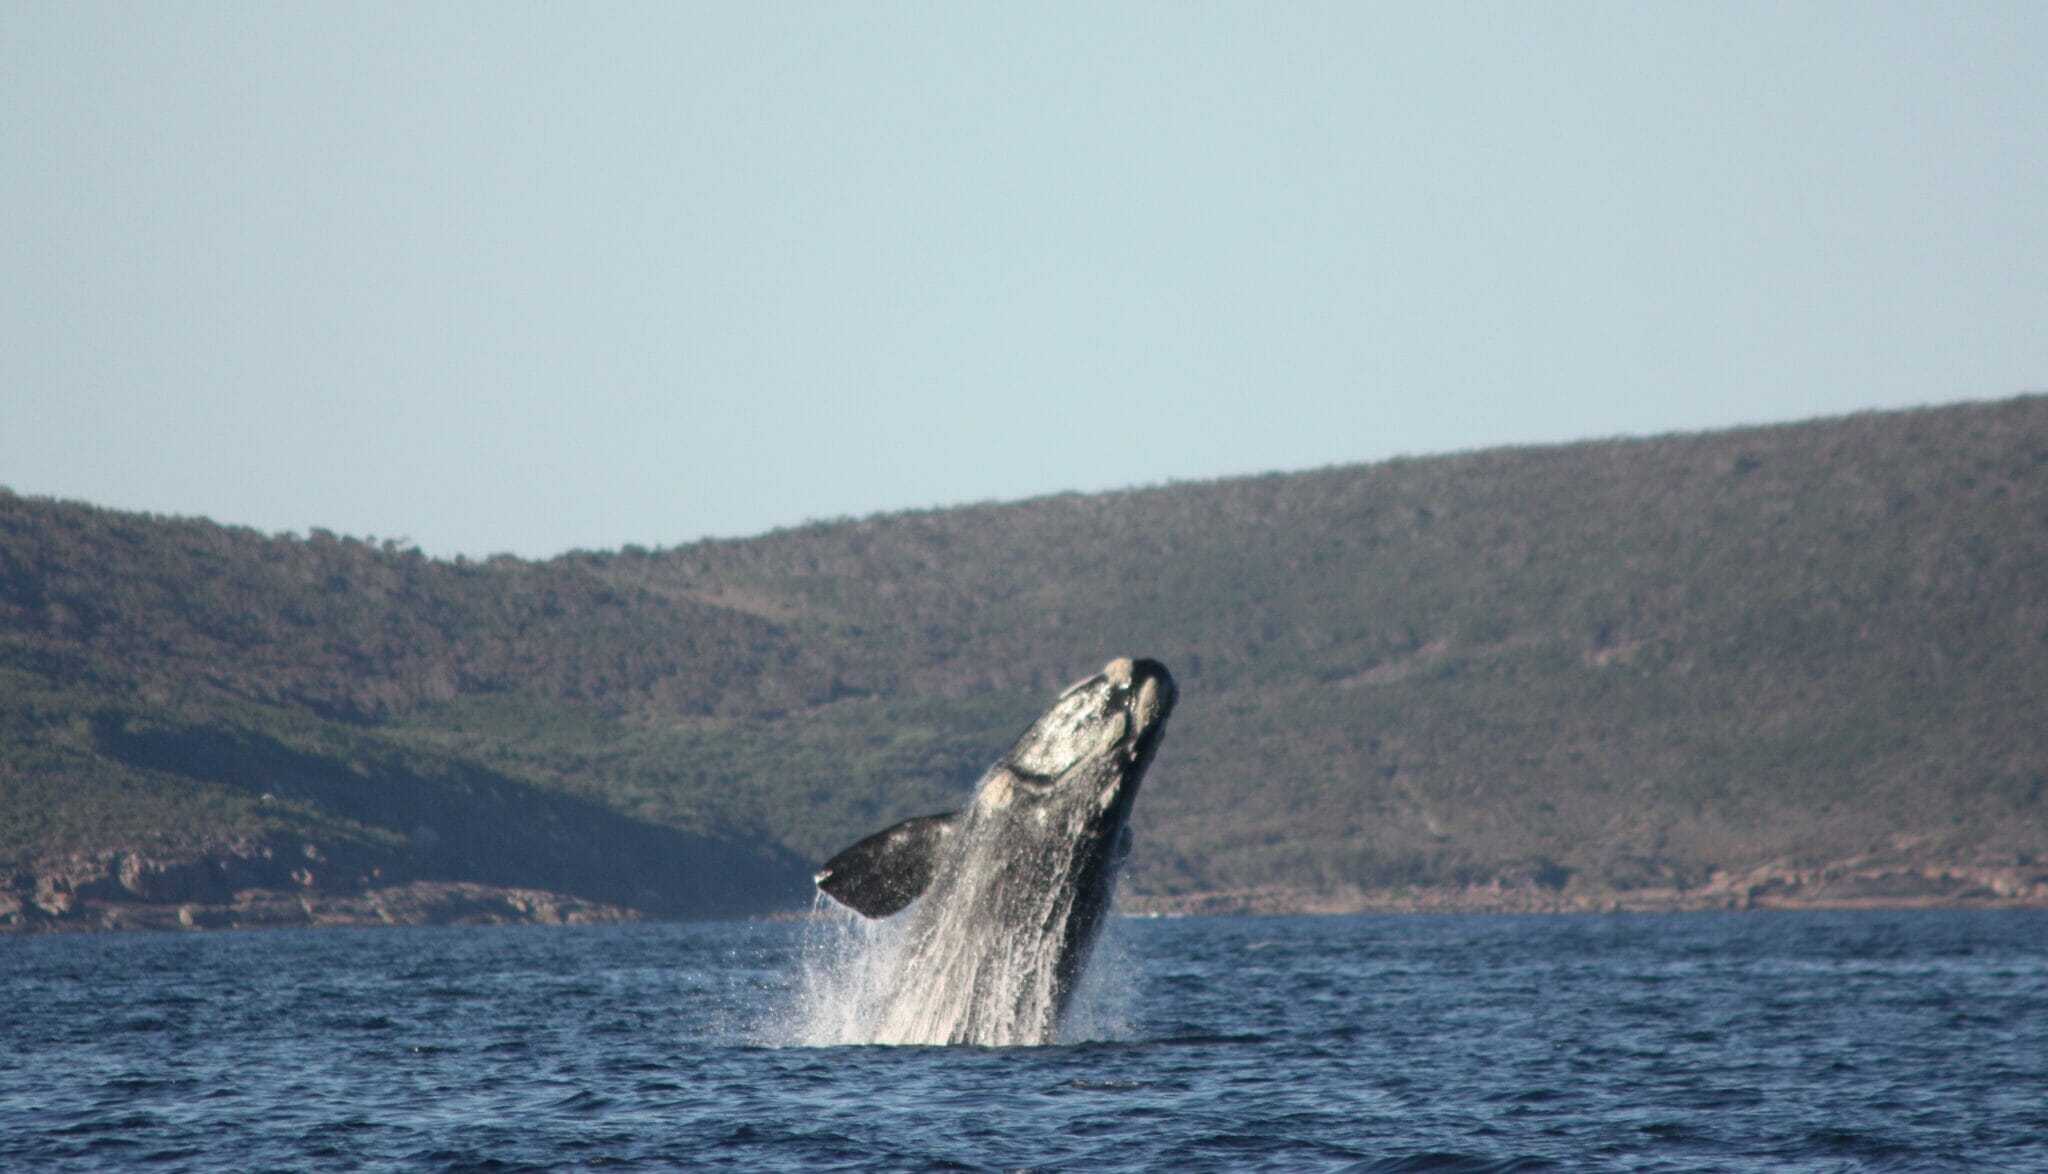 Humpback Whale in Frenchman Bay, Albany. Photo Credit: Mark Muscat